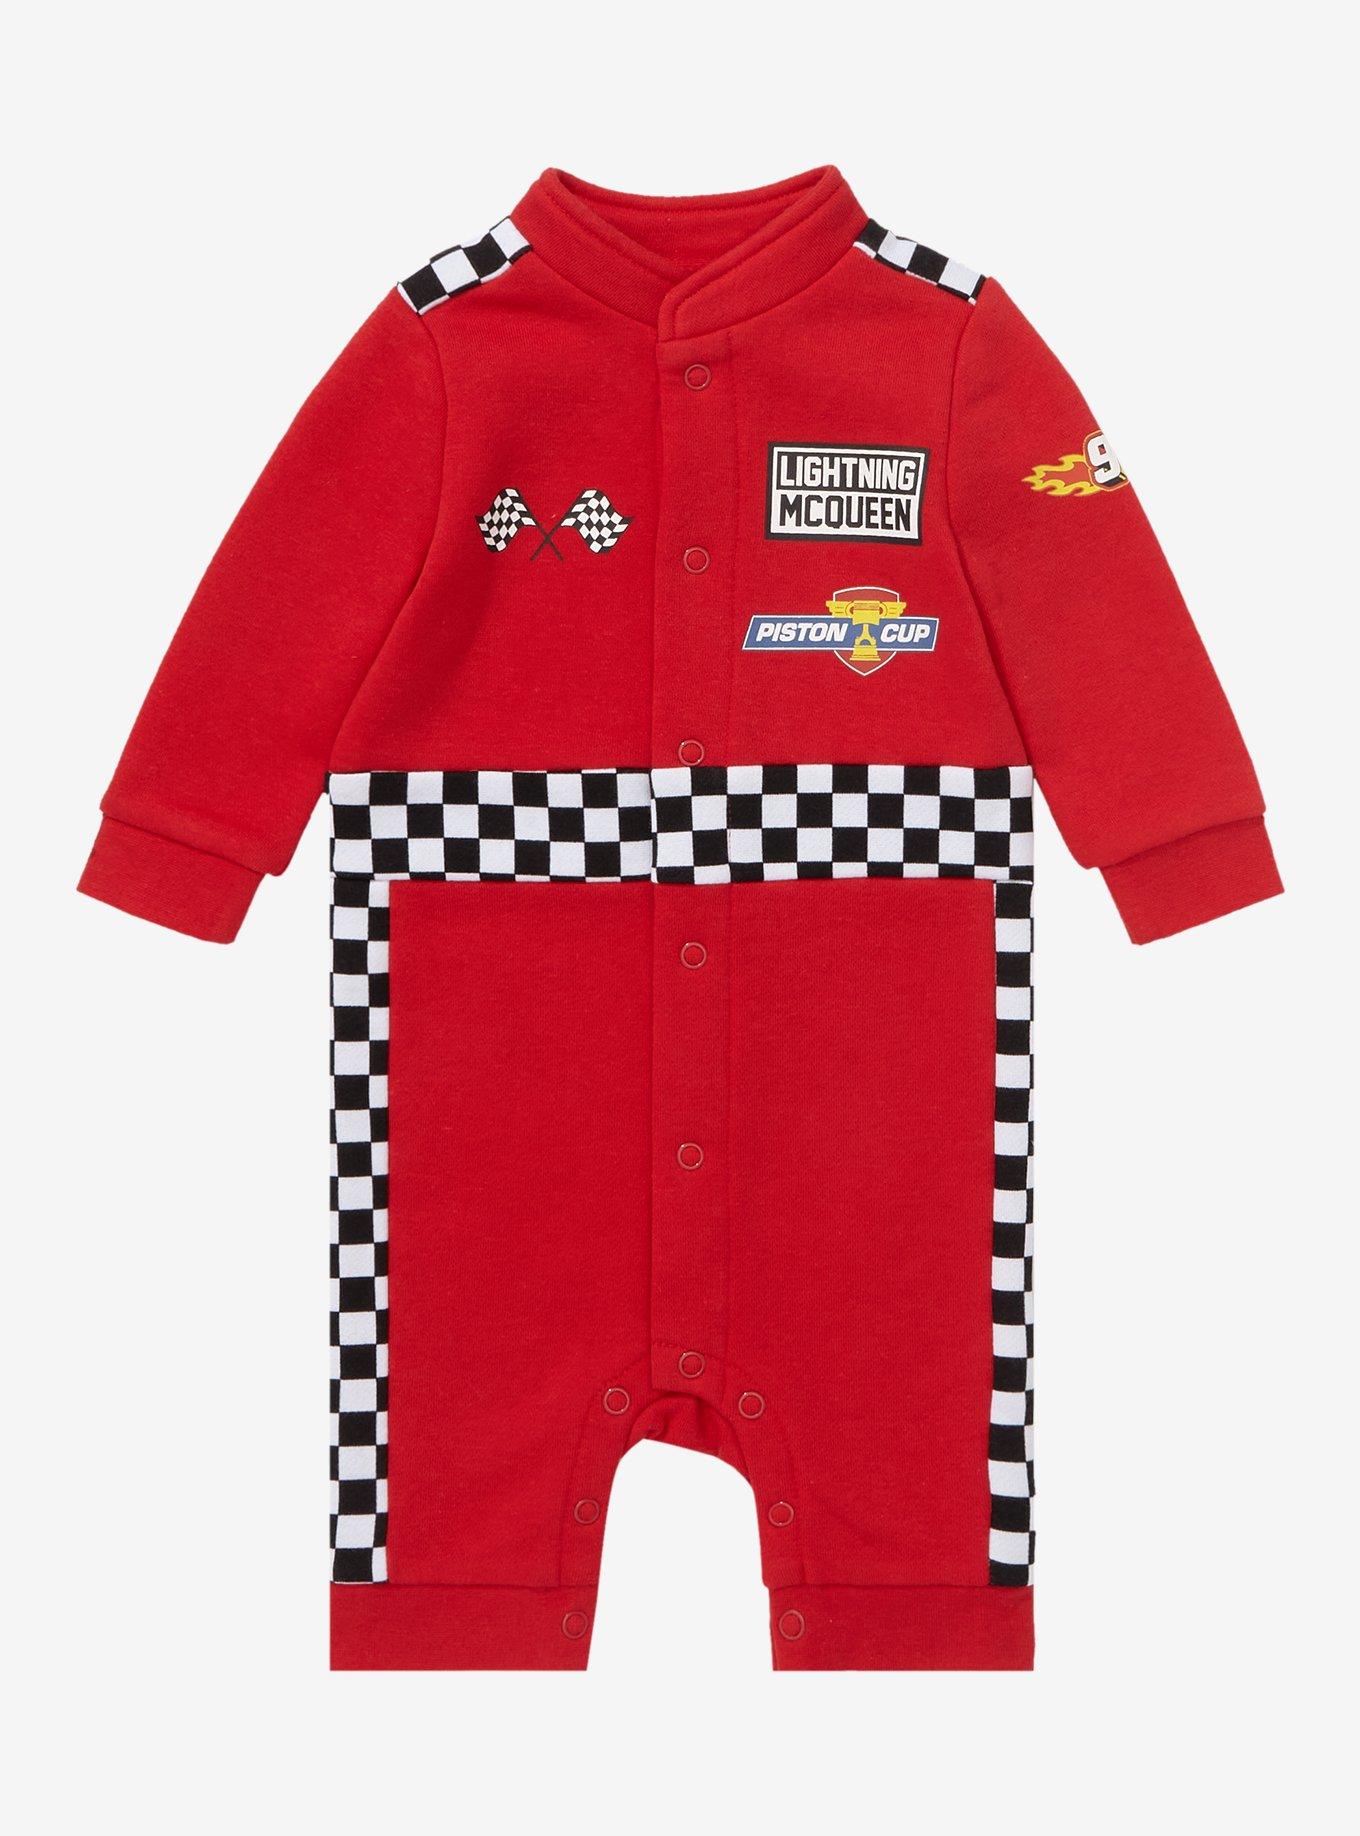 Disney Cars Baby Clothes